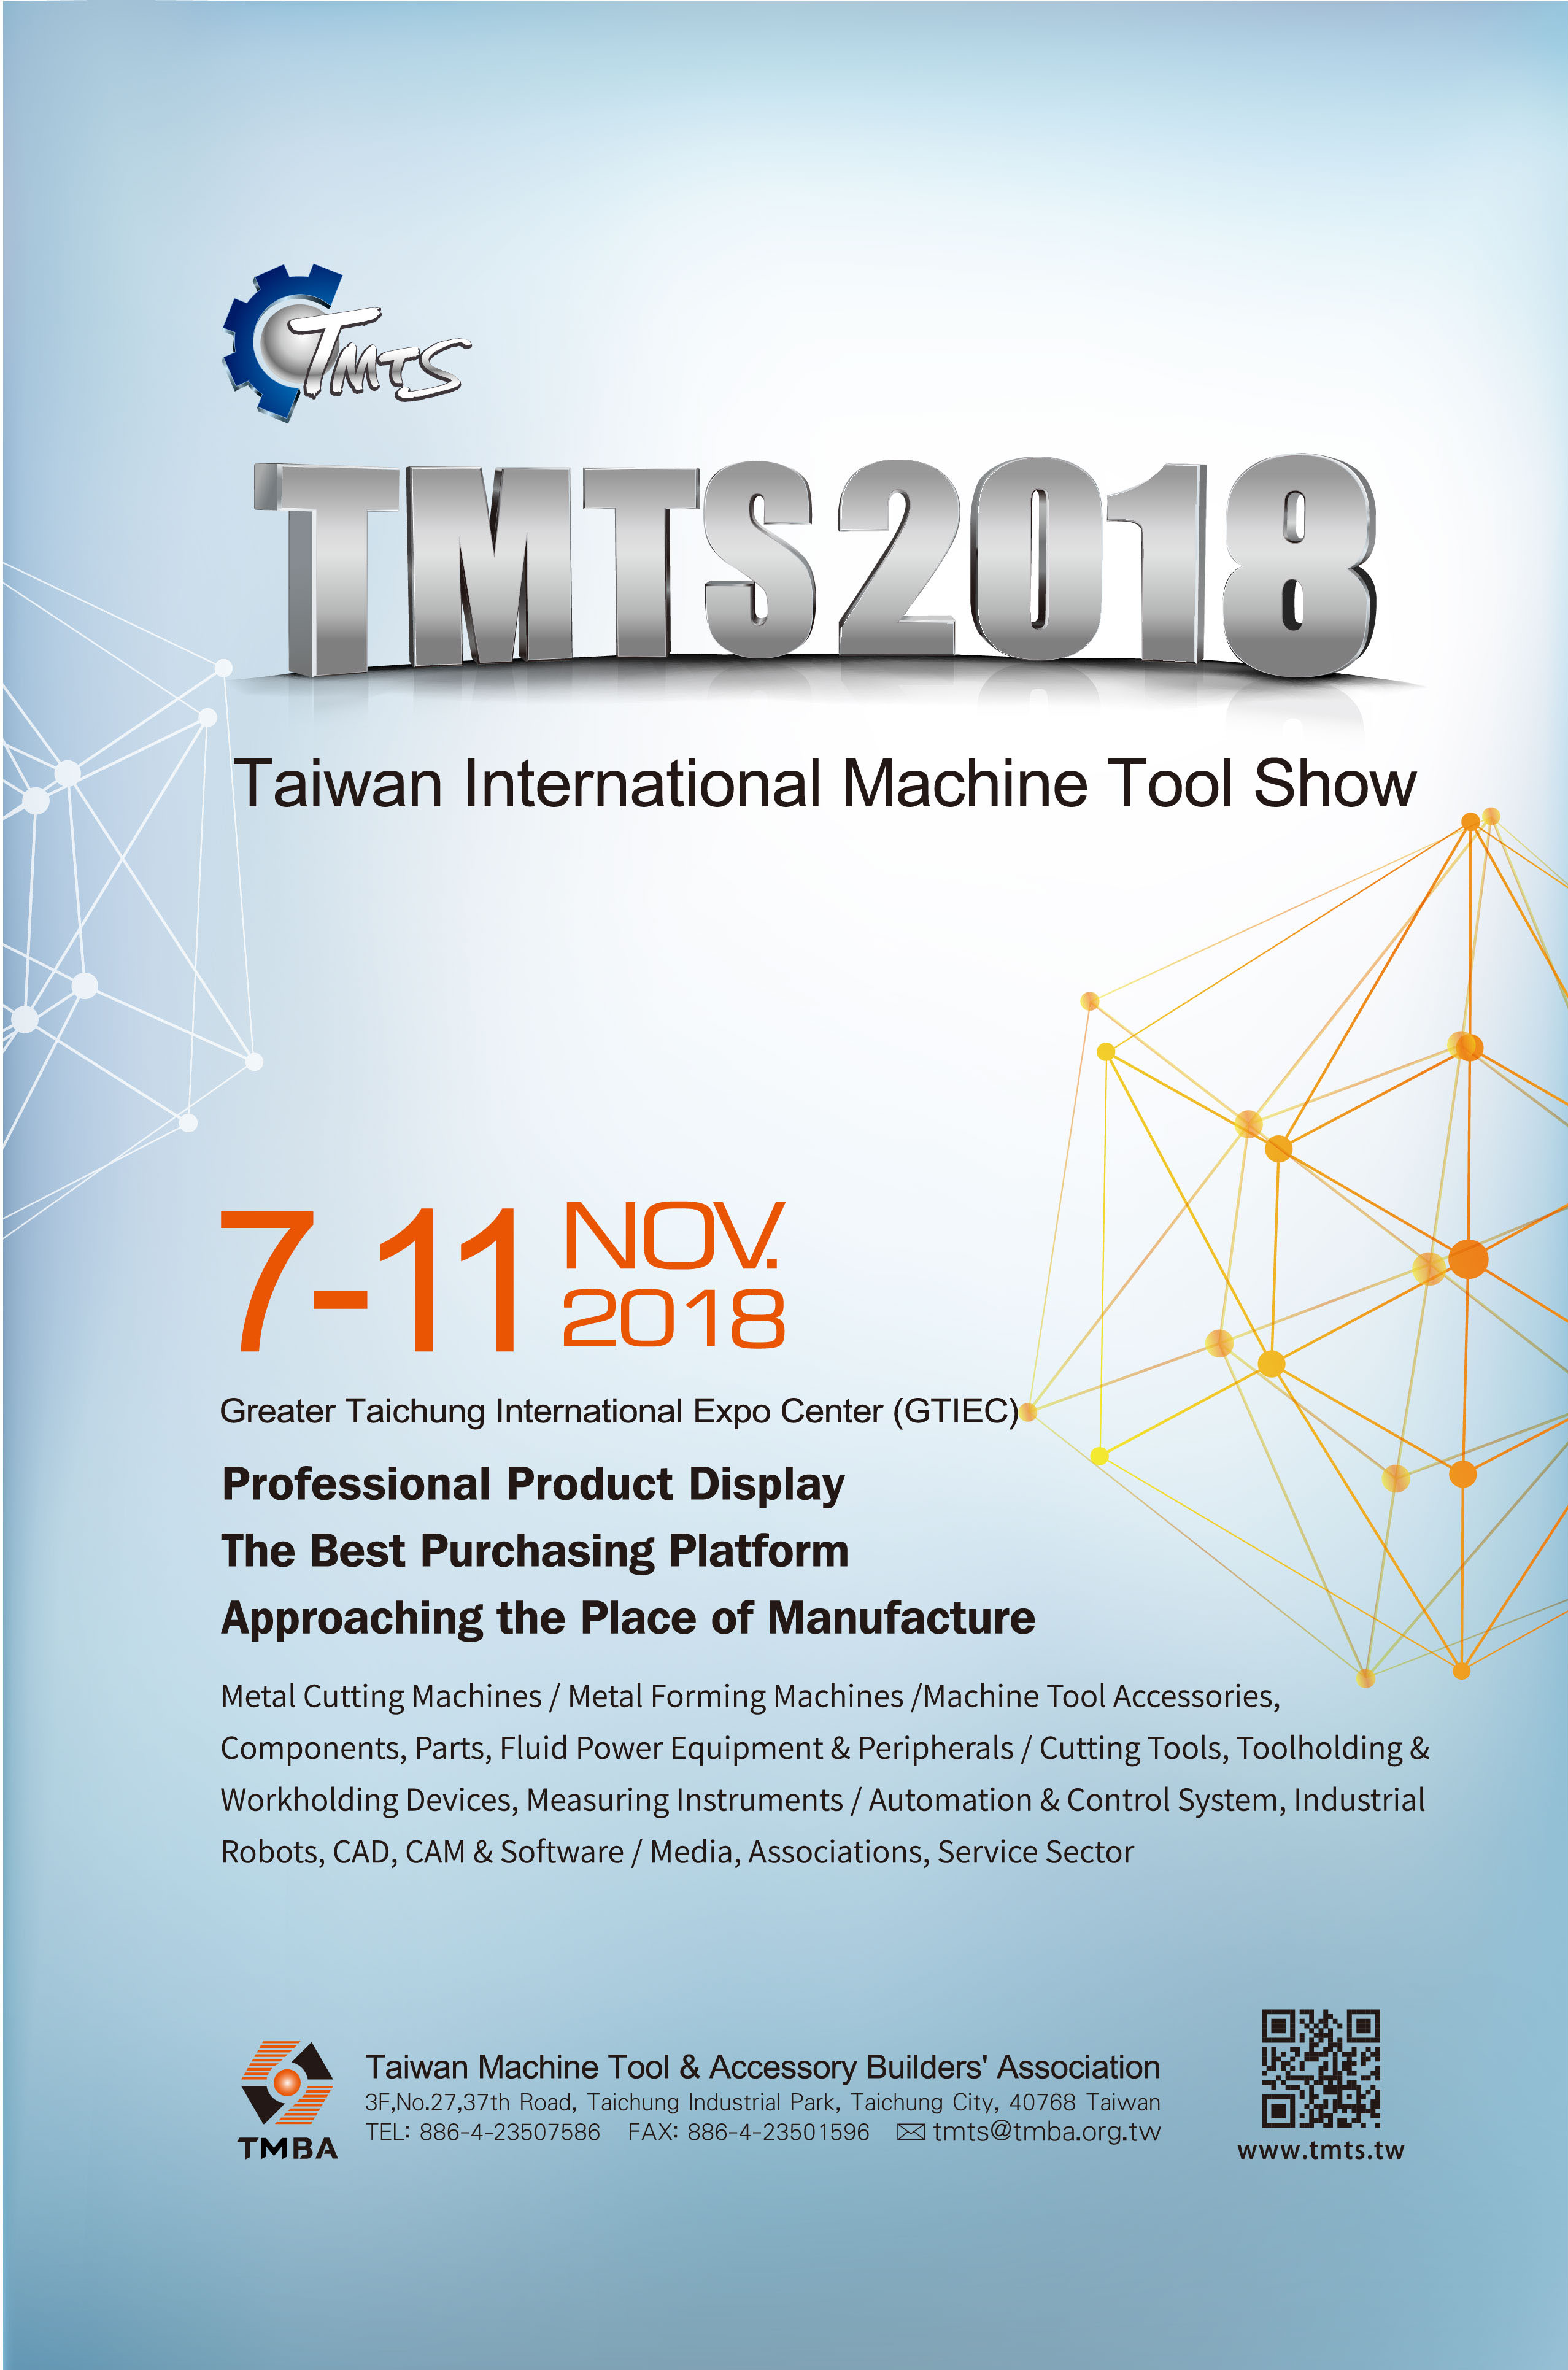 Come to visit more booths and more exhibitors in 2018 TMTS!